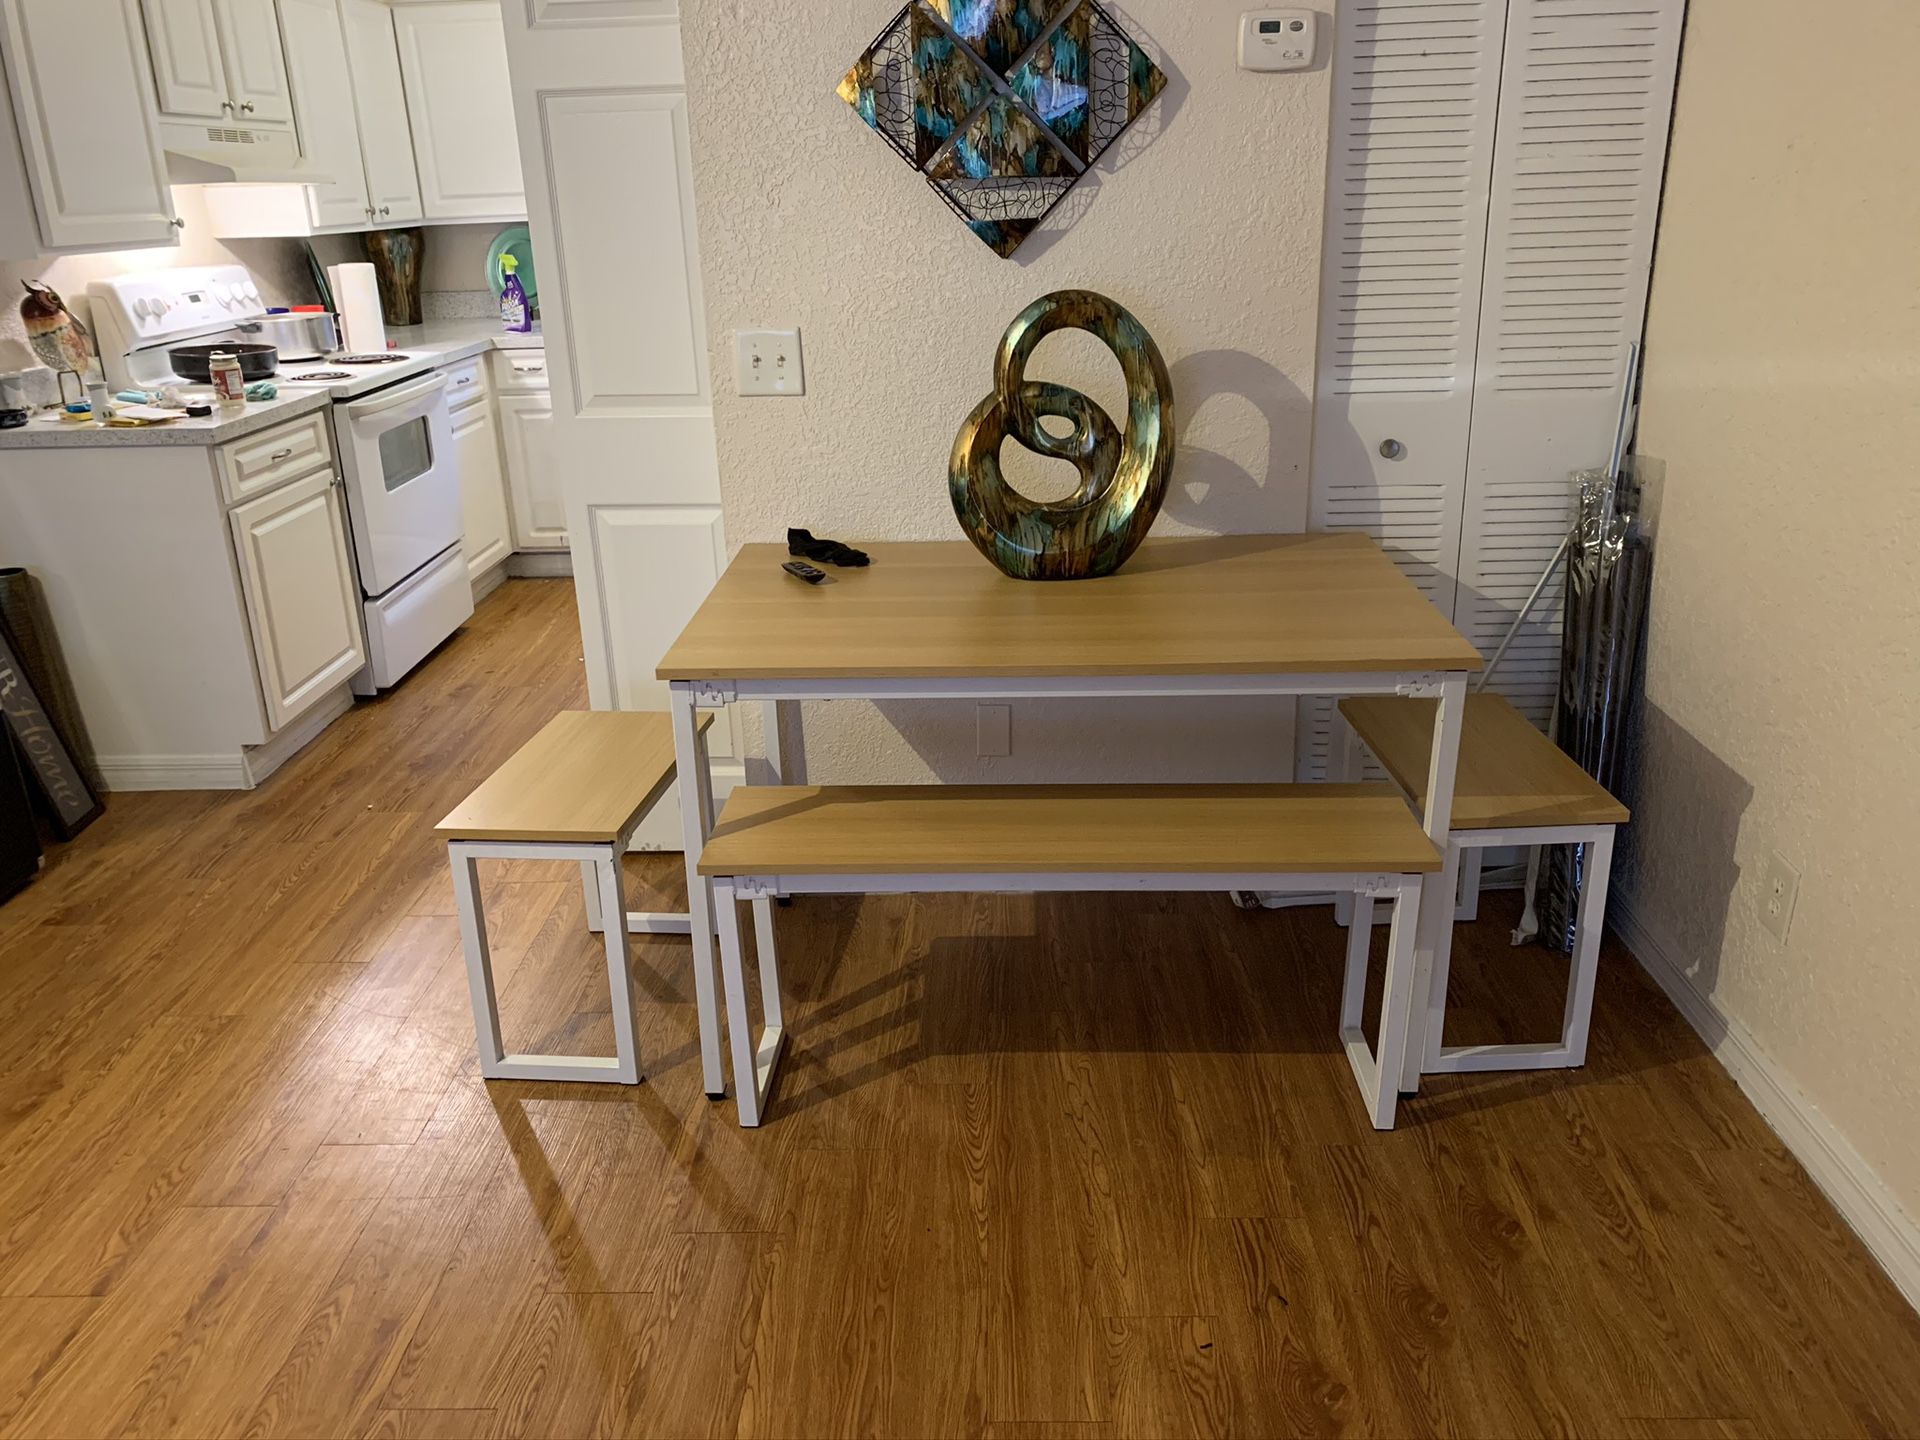 Dinning room table & metal bunk bed